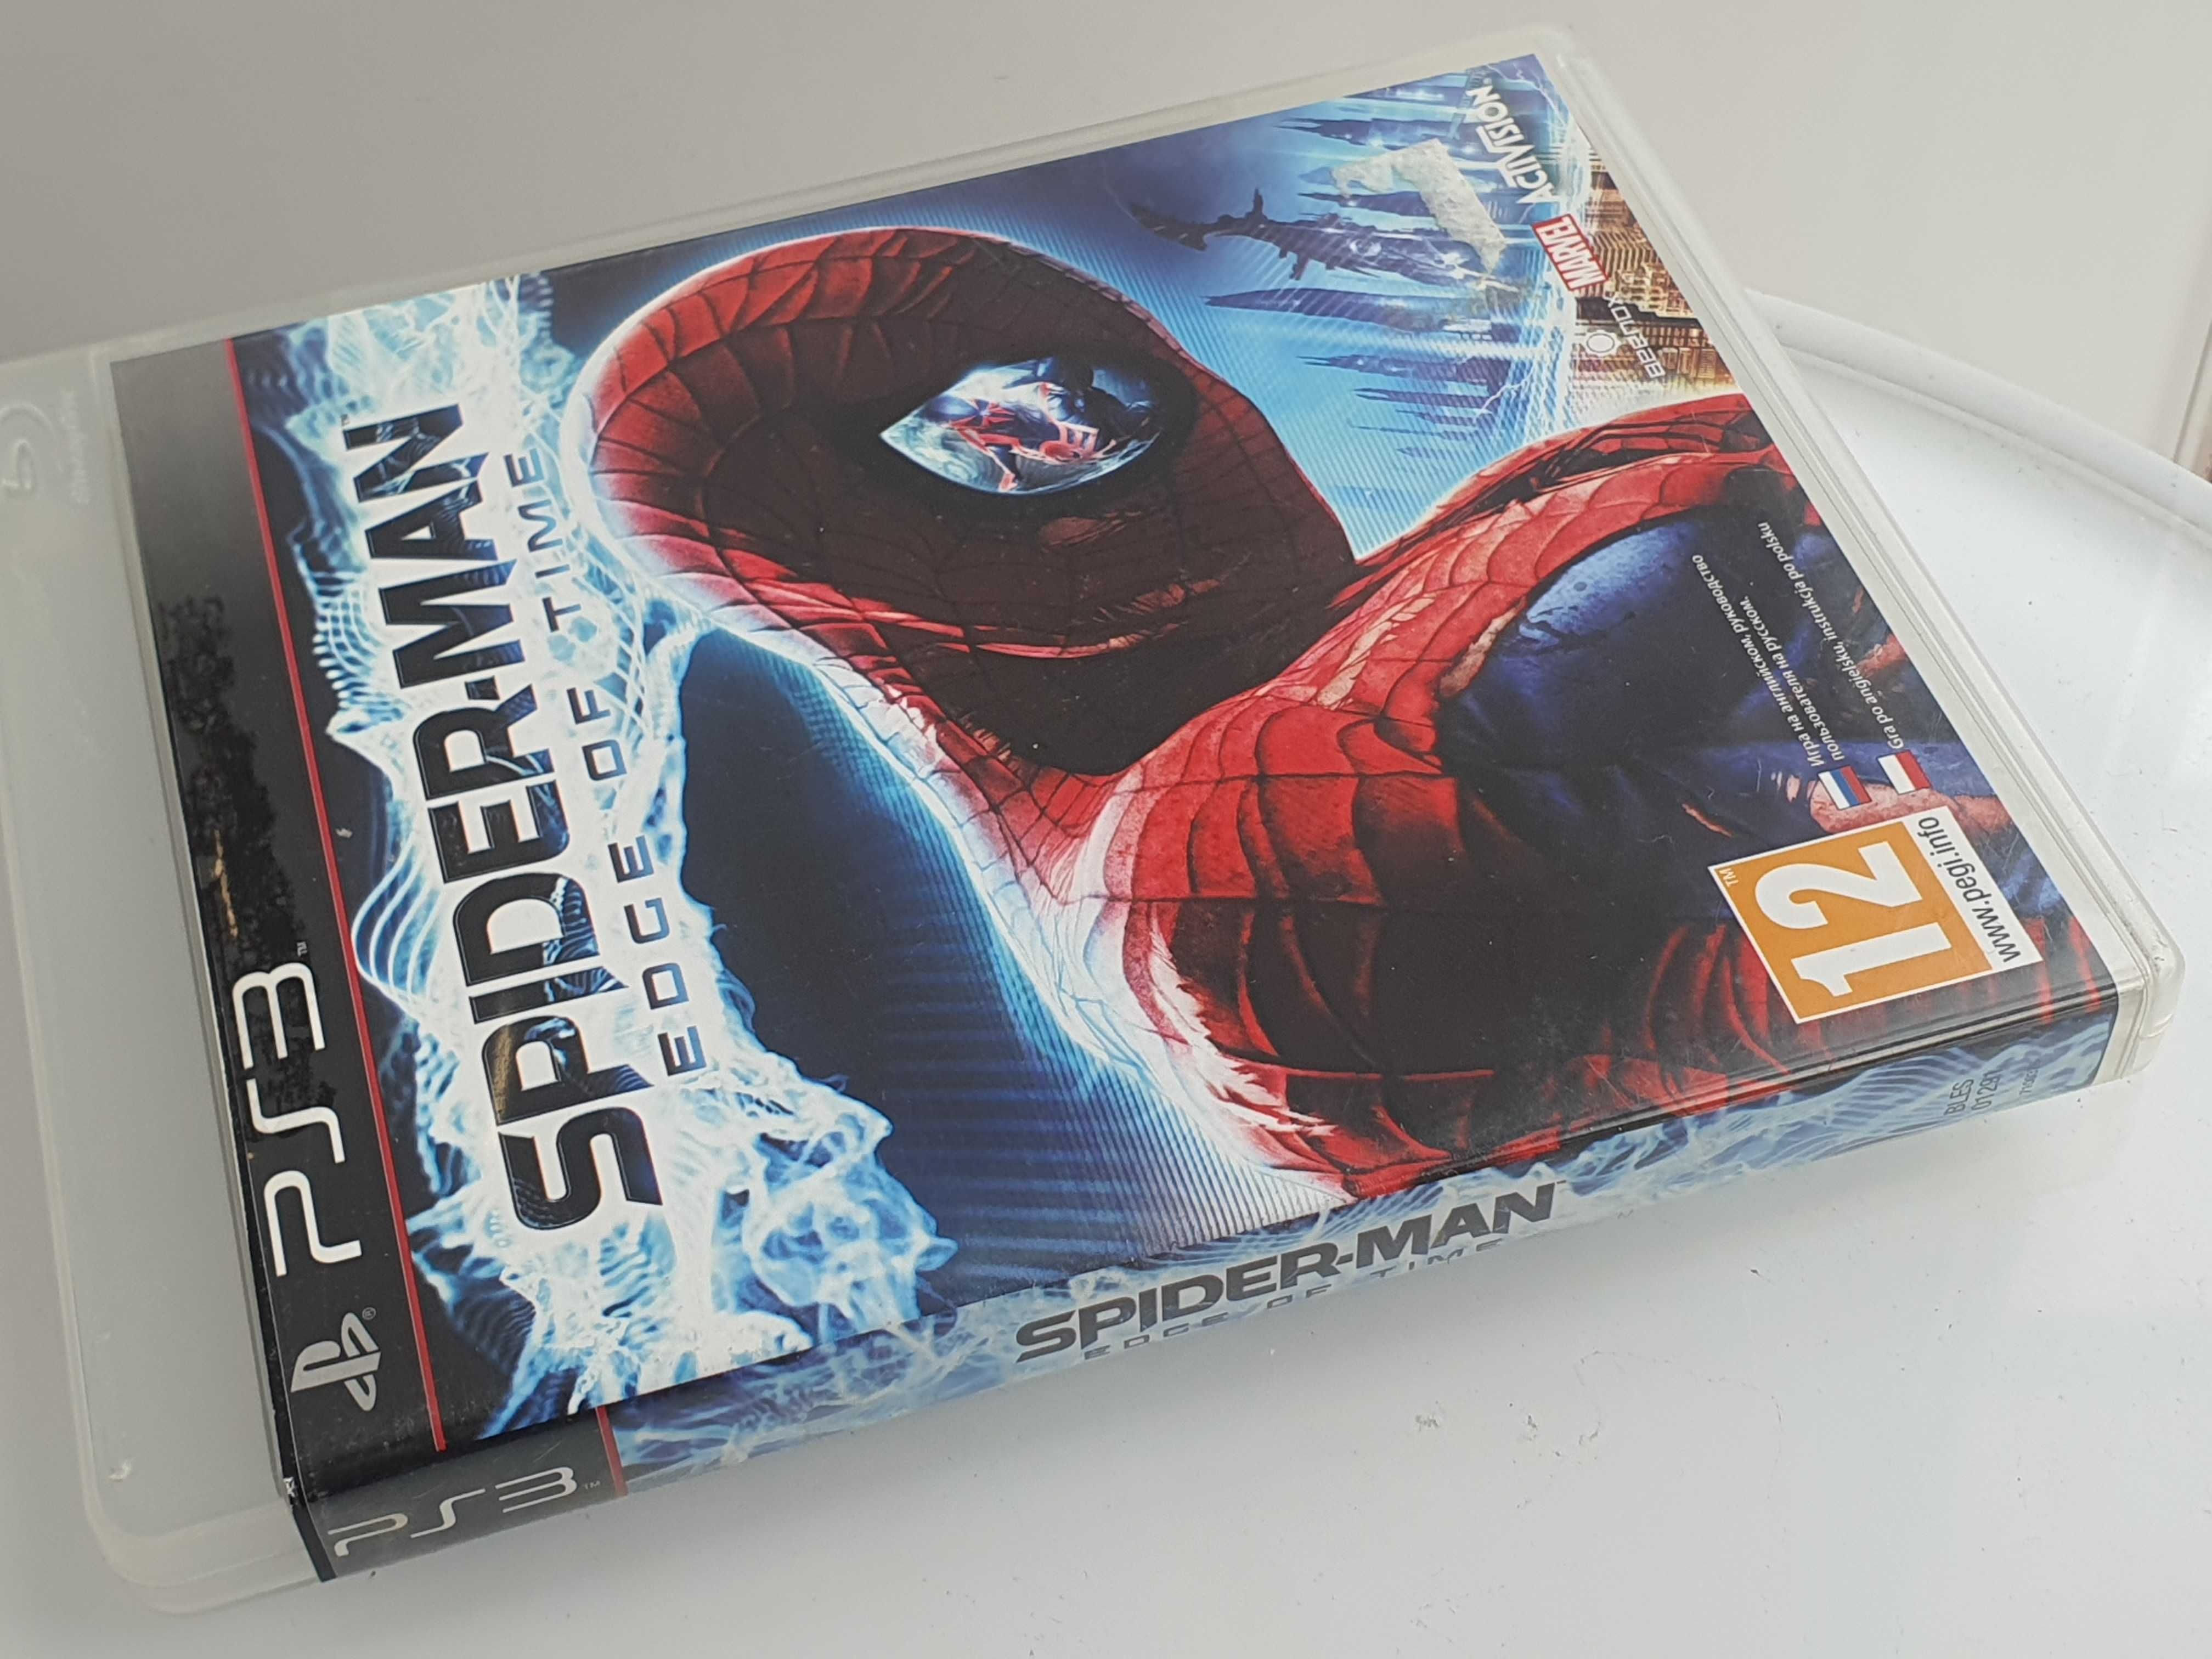 SPIDER-MAN Edge of The Time PlayStation 3 PS3 PL Sklep Zamiana